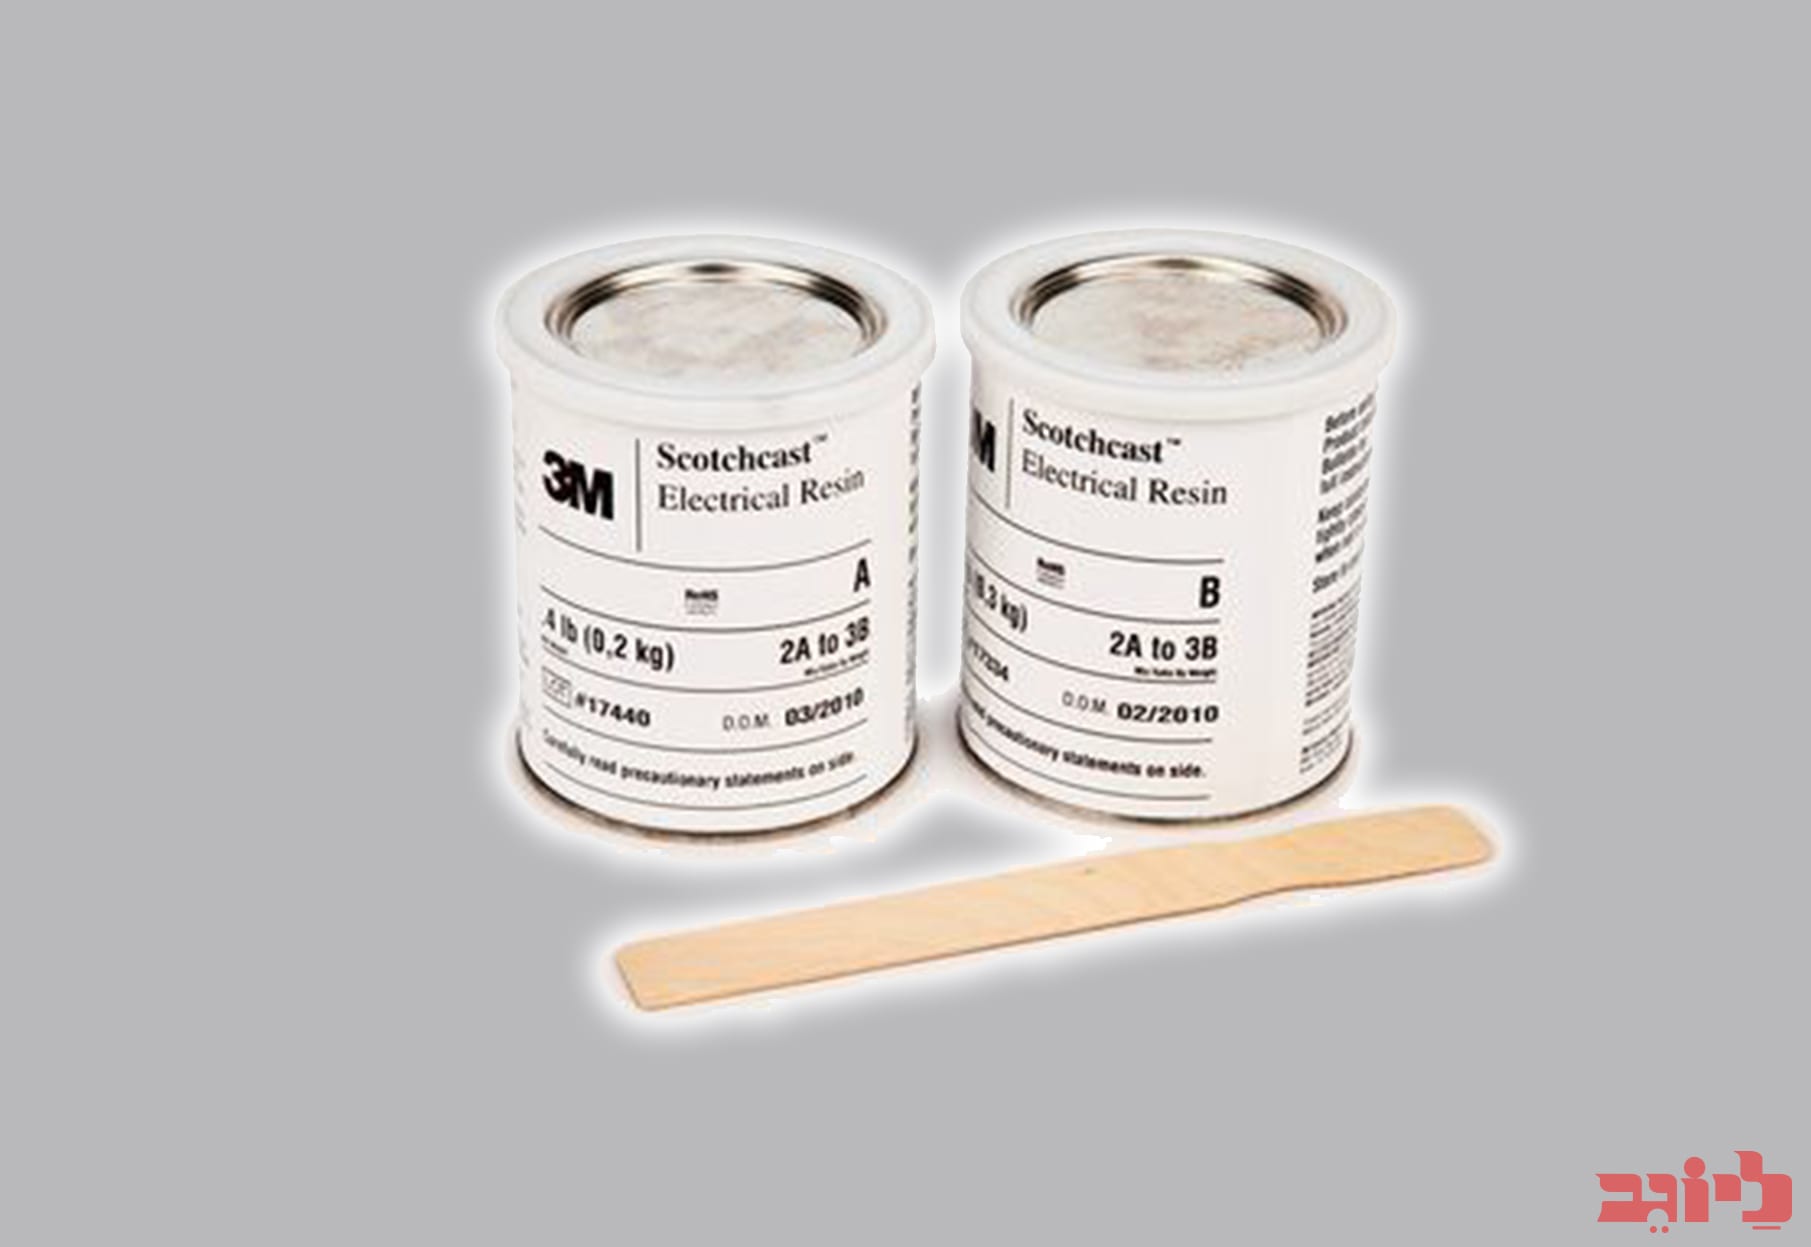 Scotchcast Electrical Resin 9